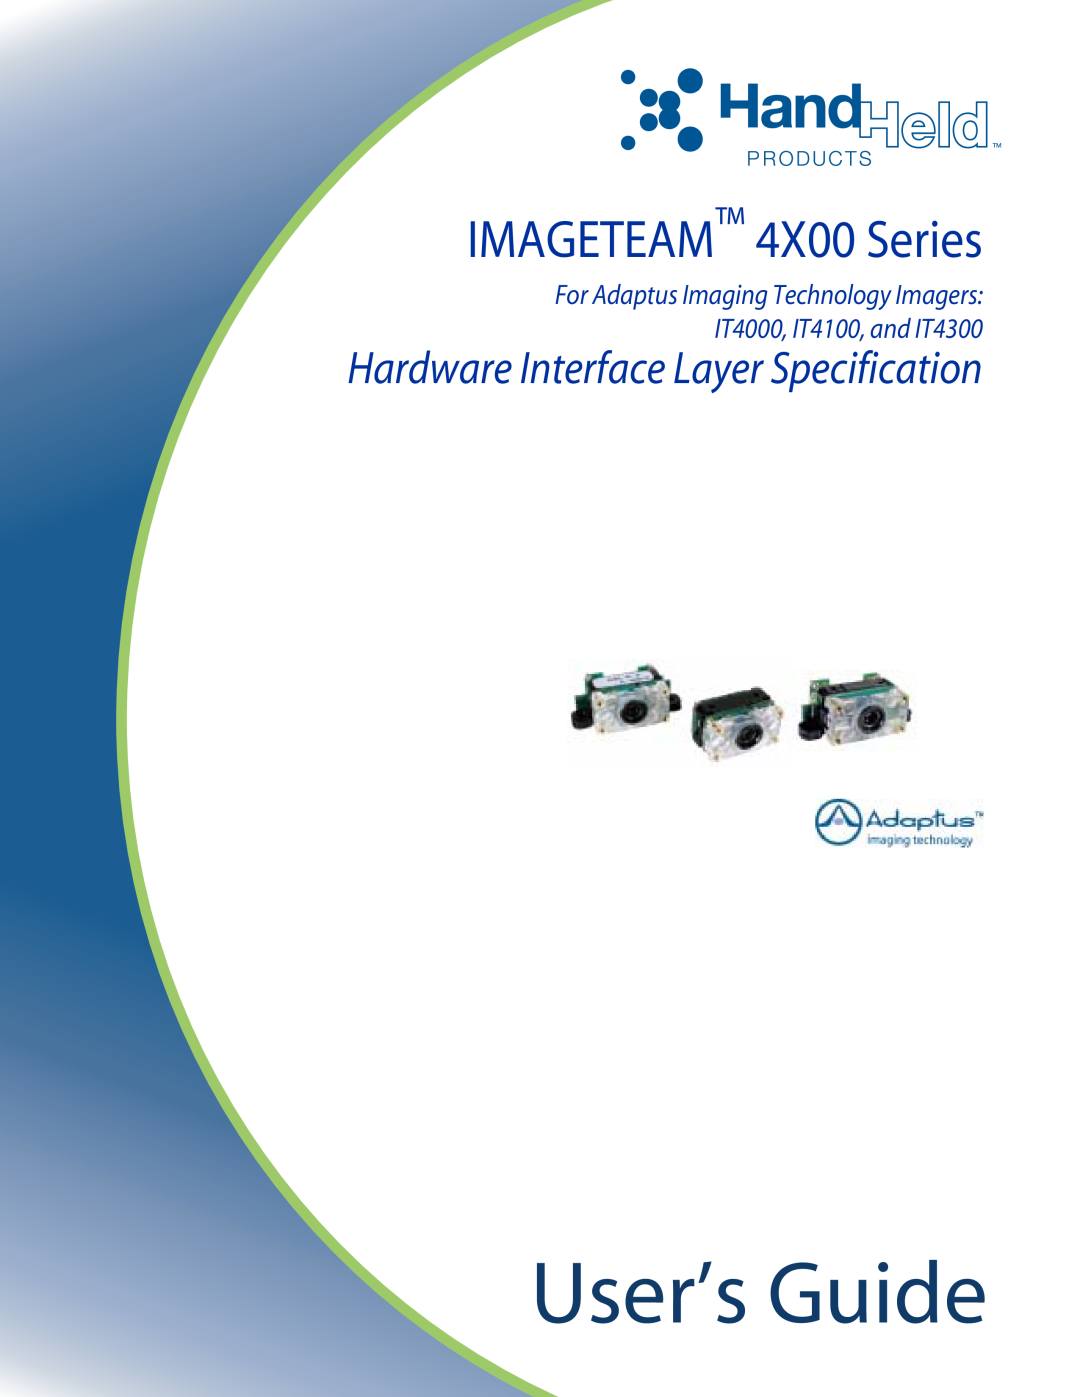 Hand Held Products manual User’s Guide, IMAGETEAM 4X00 Series, Hardware Interface Layer Specification 